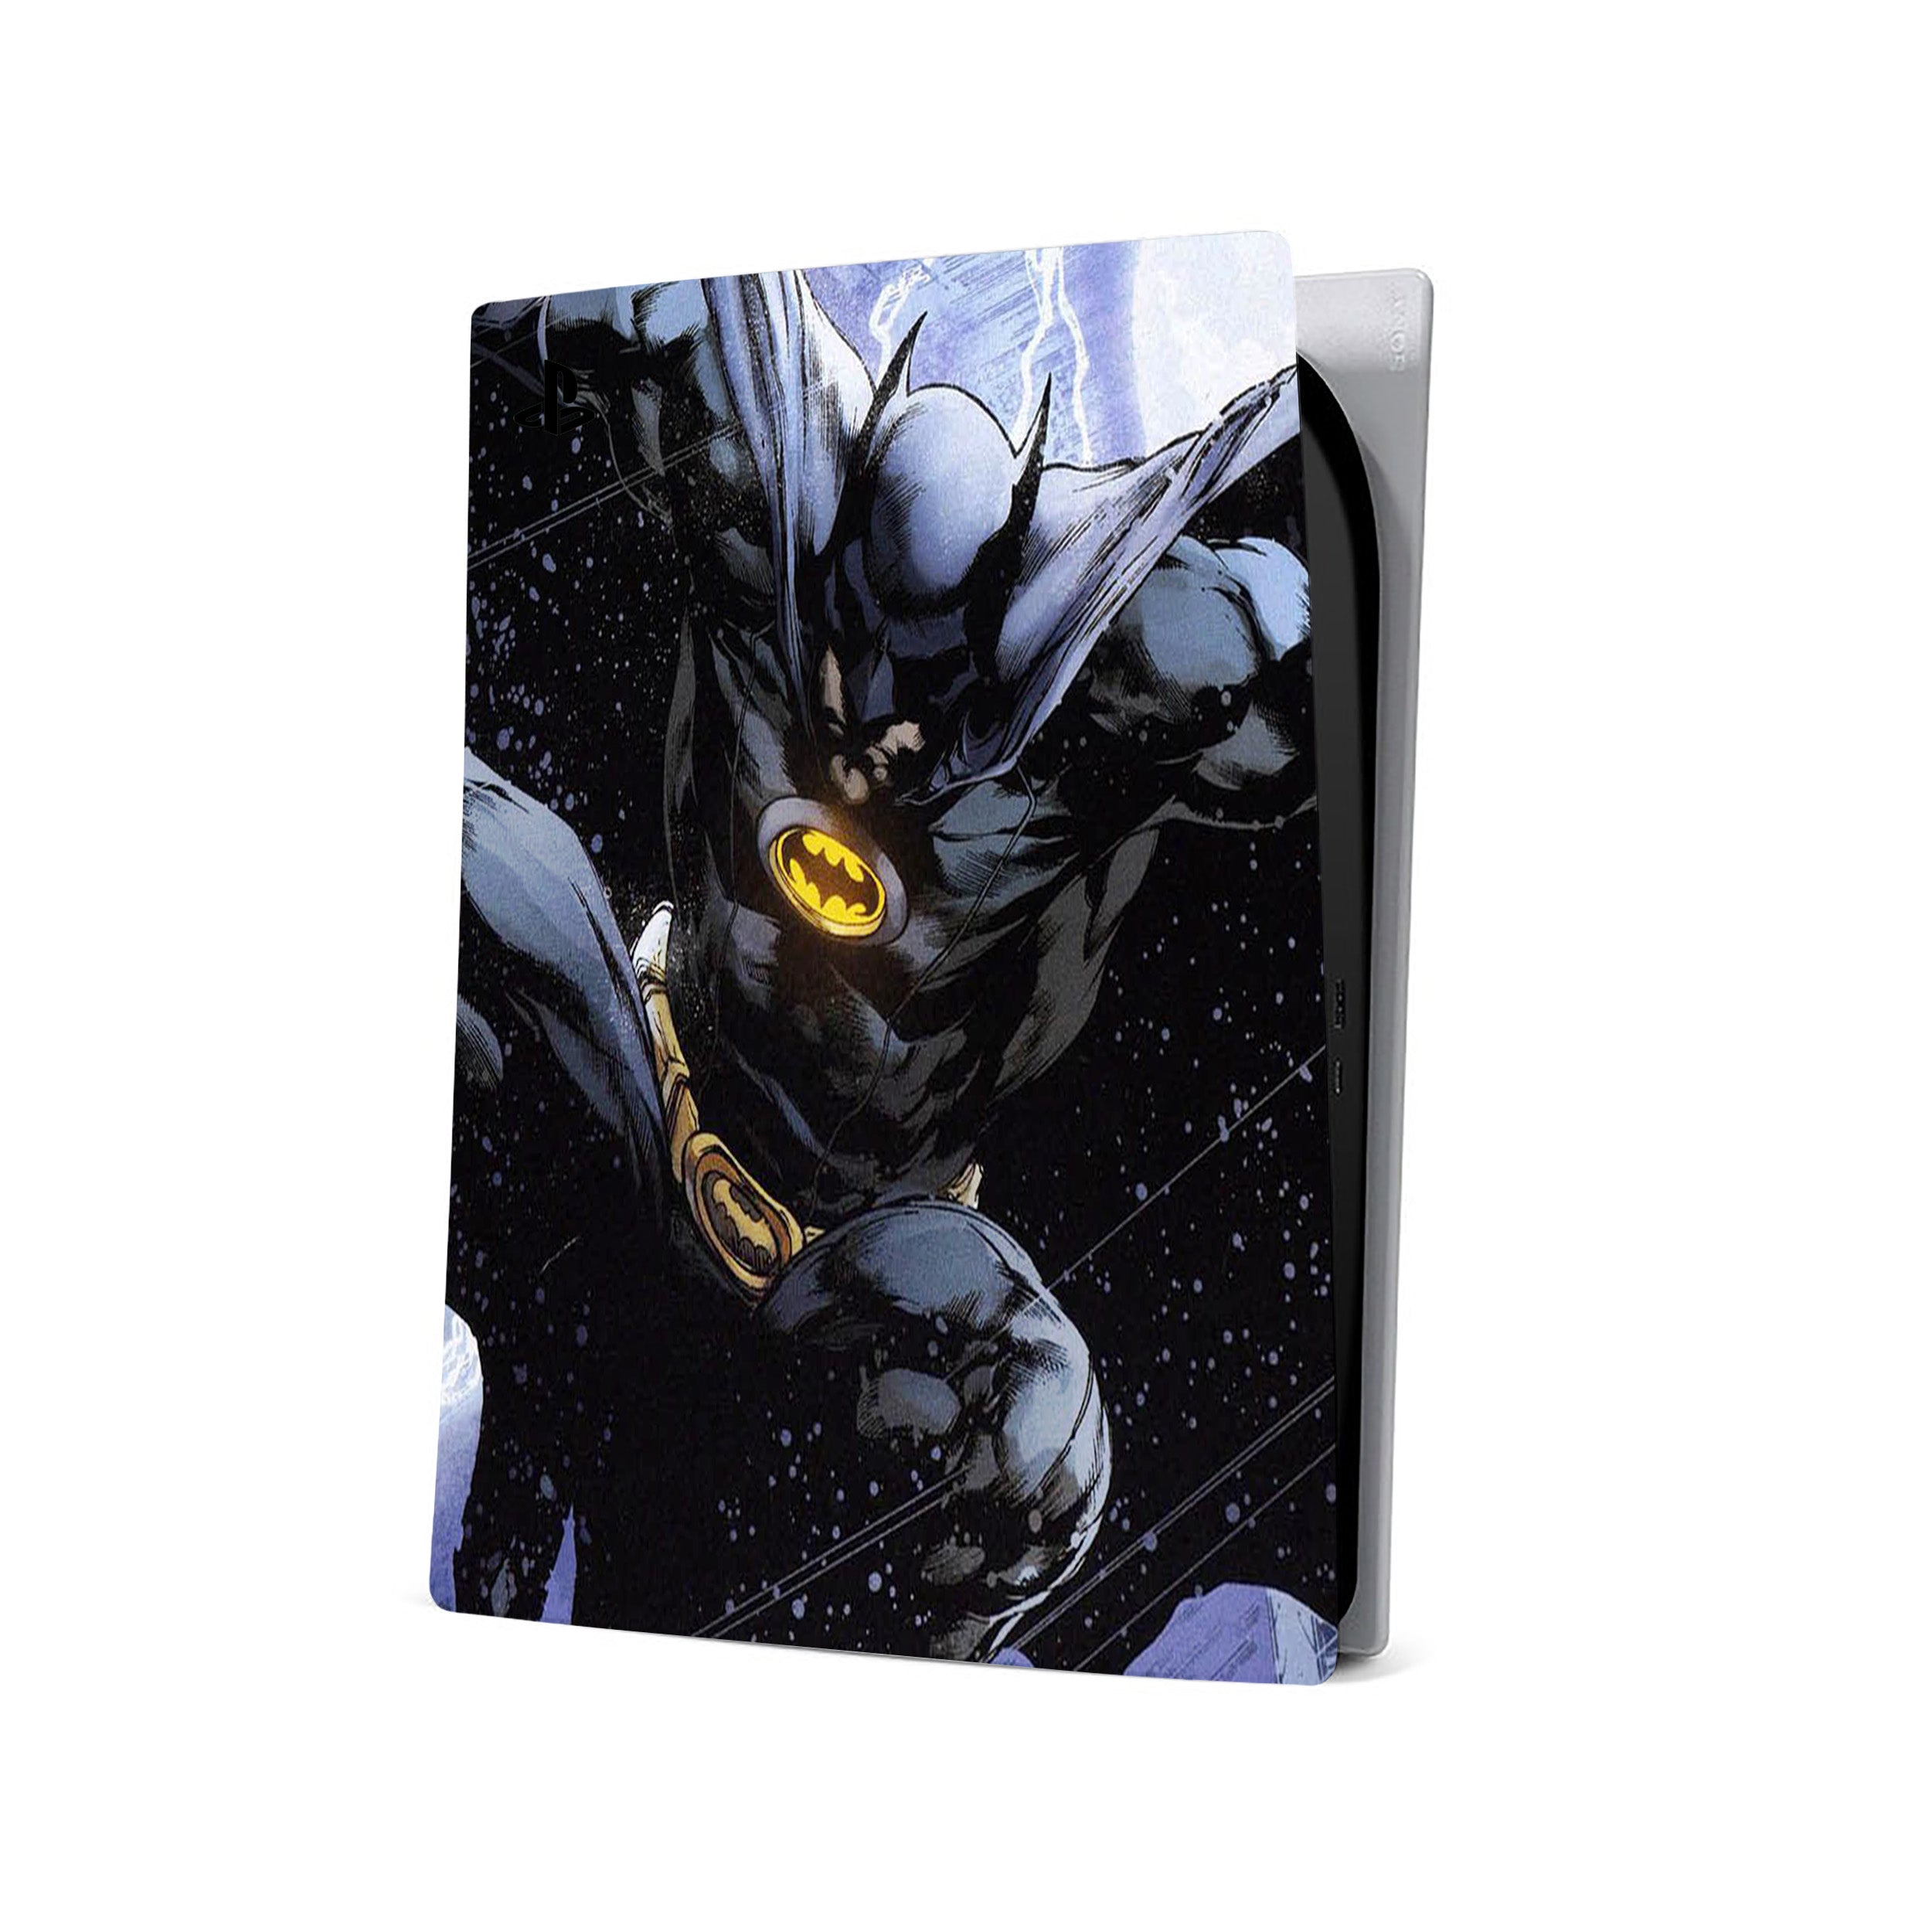 A video game skin featuring a DC Batman design for the PS5.